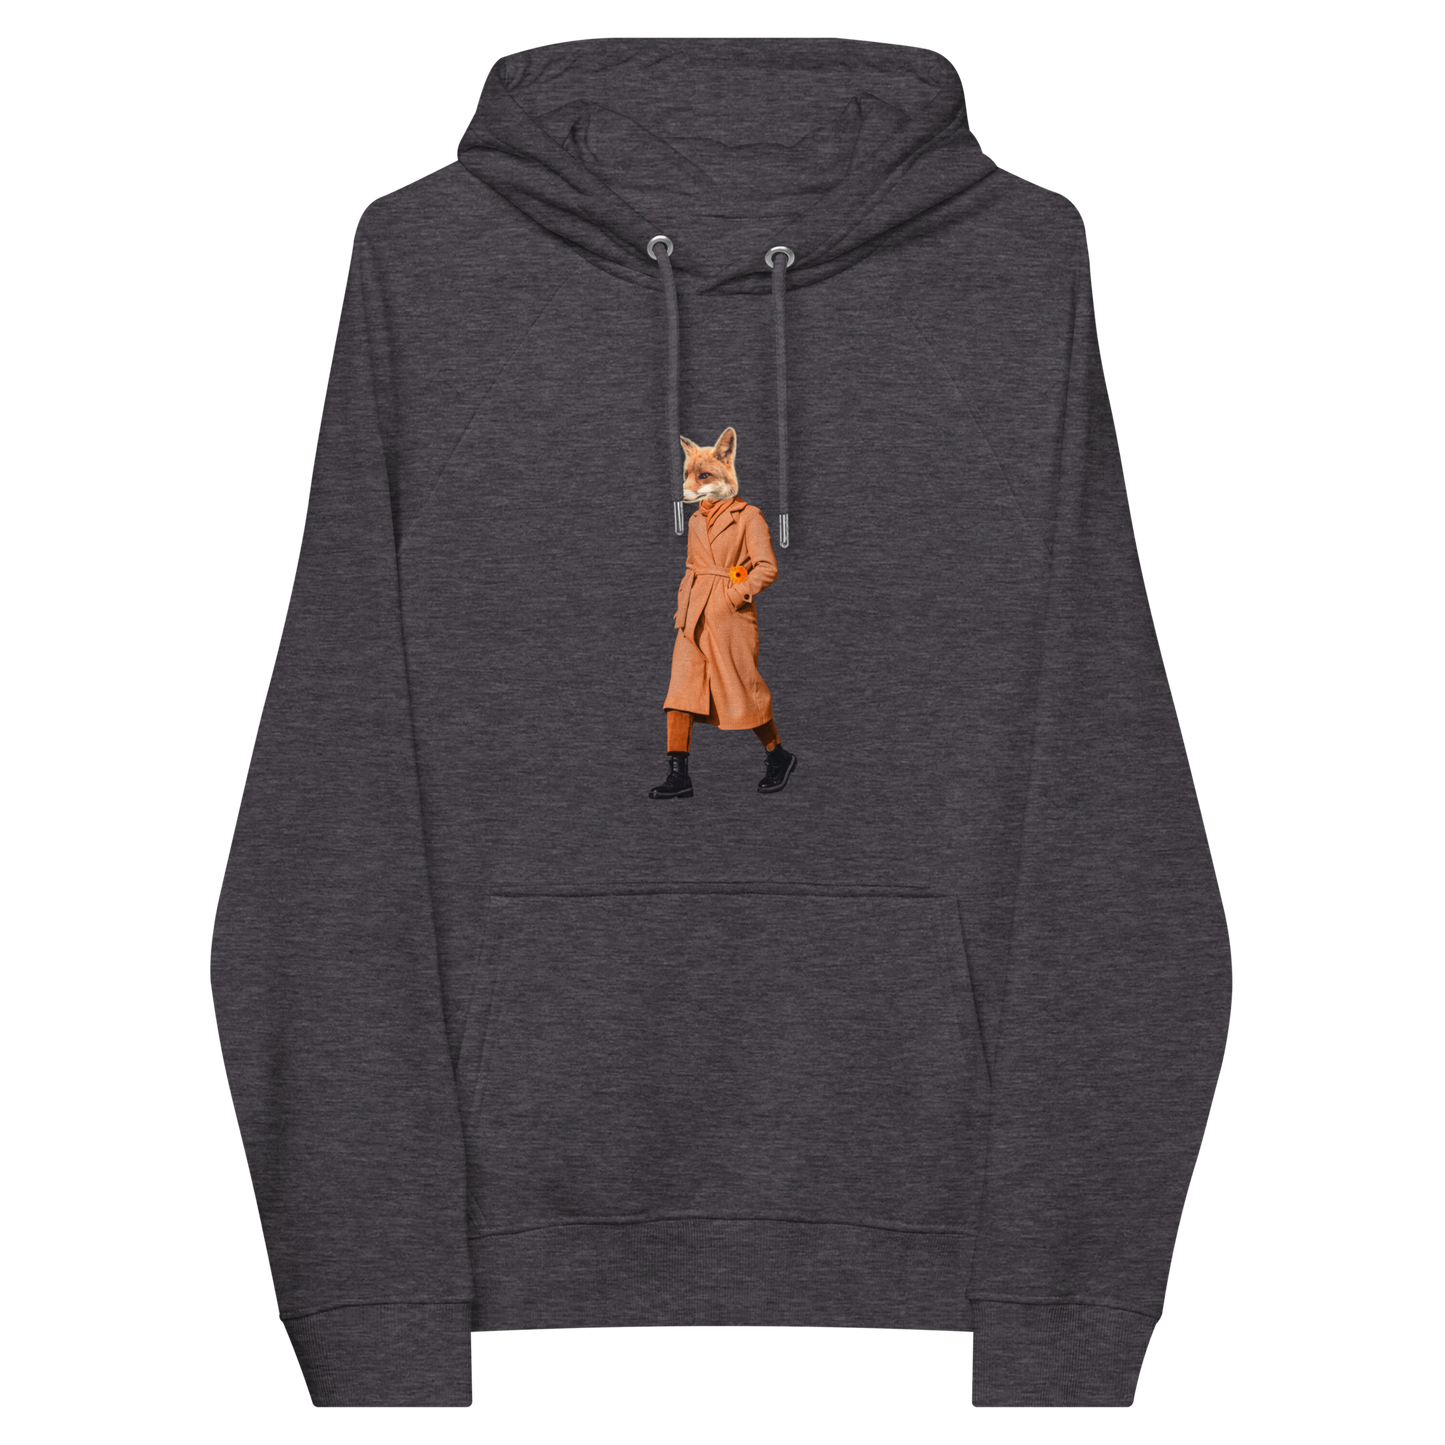 Charcoal Melange Anthropomorphic Fox Raglan Hoodie featuring a sly Anthropomorphic Fox in a Trench Coat graphic on the chest - Funny Graphic Fox Hoodies - Boozy Fox